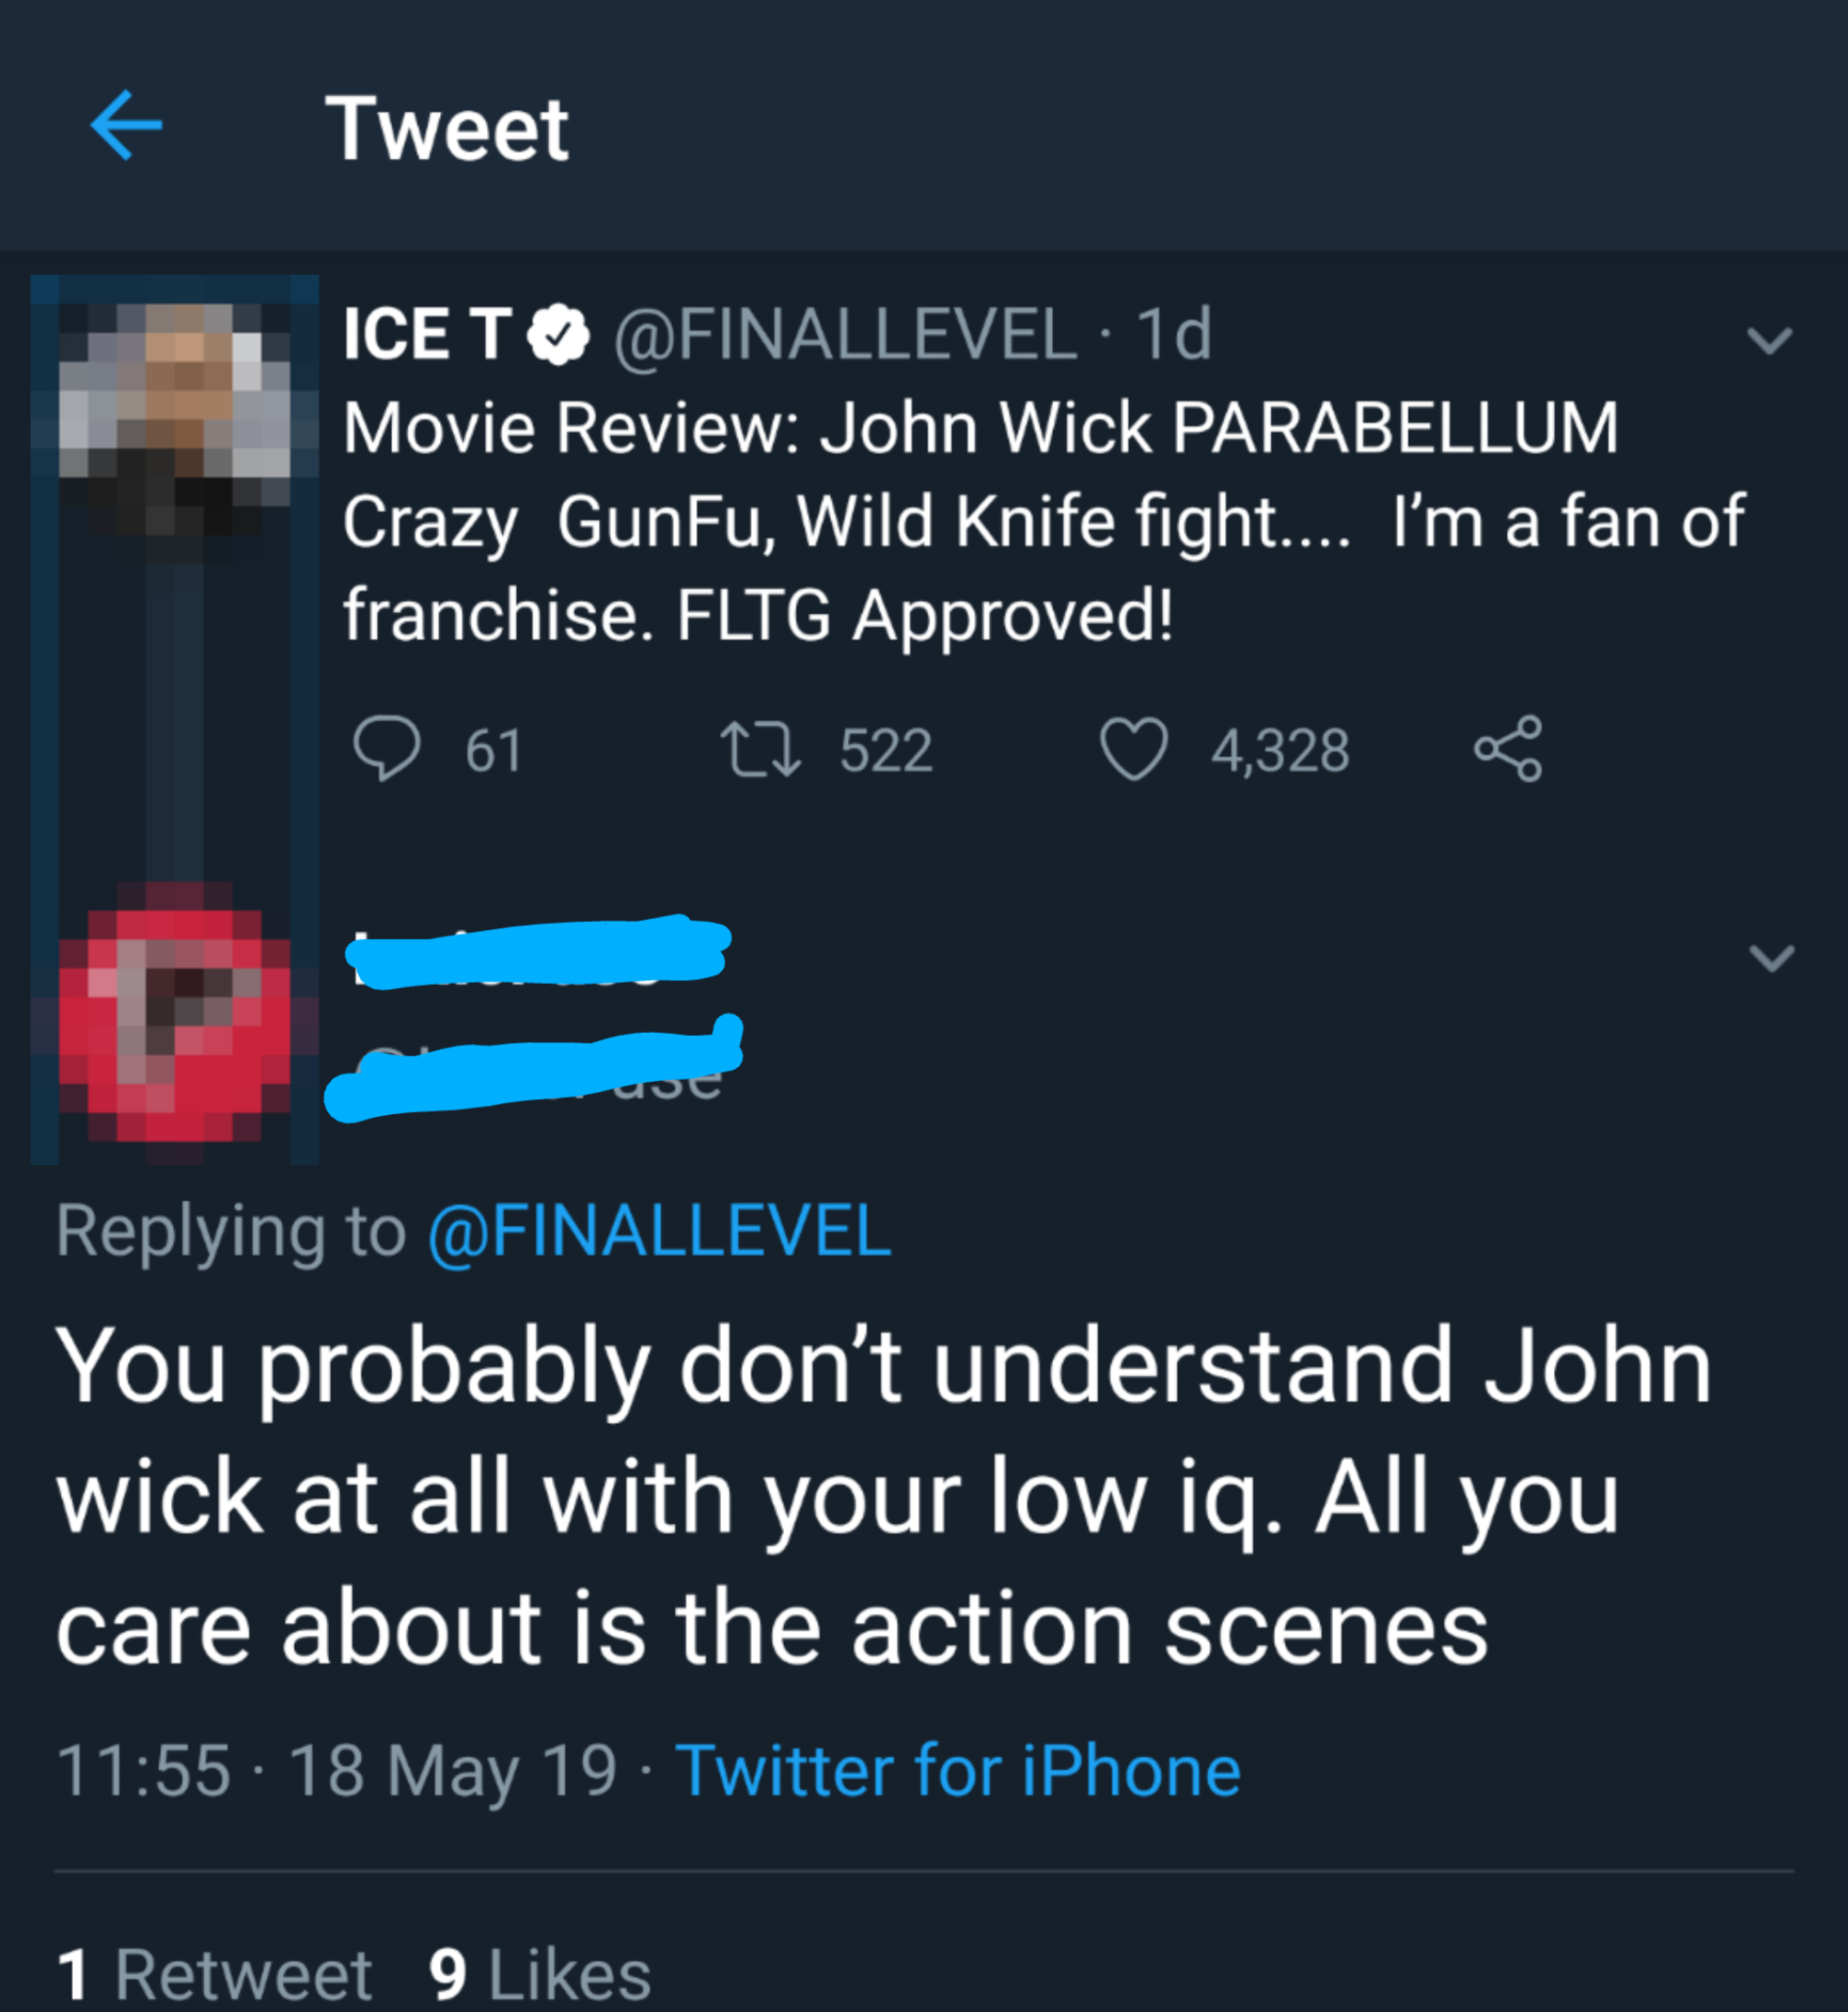 Tweet by user &#x27;ICET&#x27; praising the John Wick movie franchise. Another user replies with a critical comment